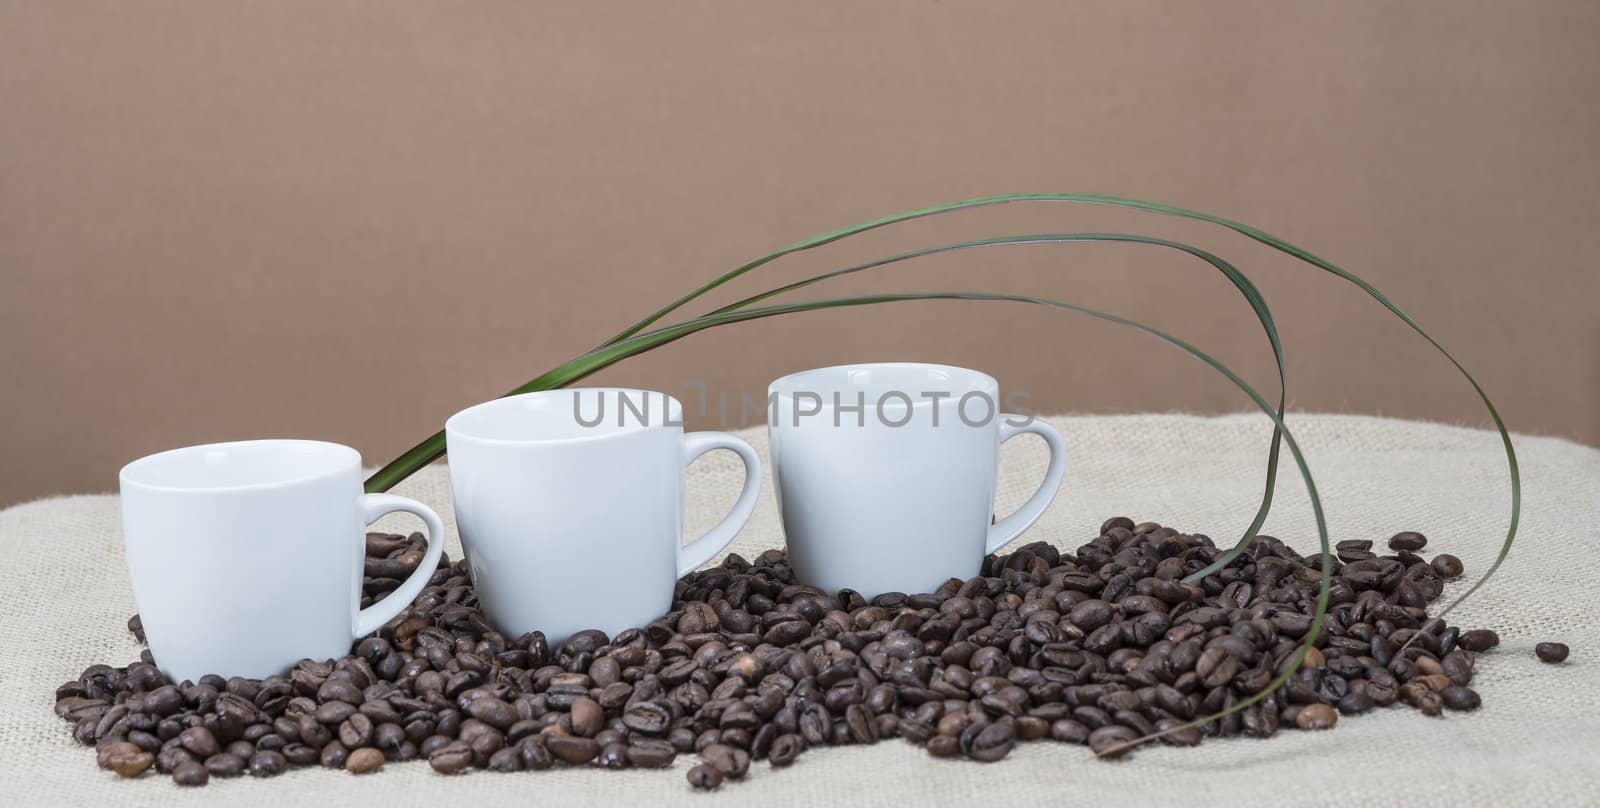 Still life about coffee with cups and beans